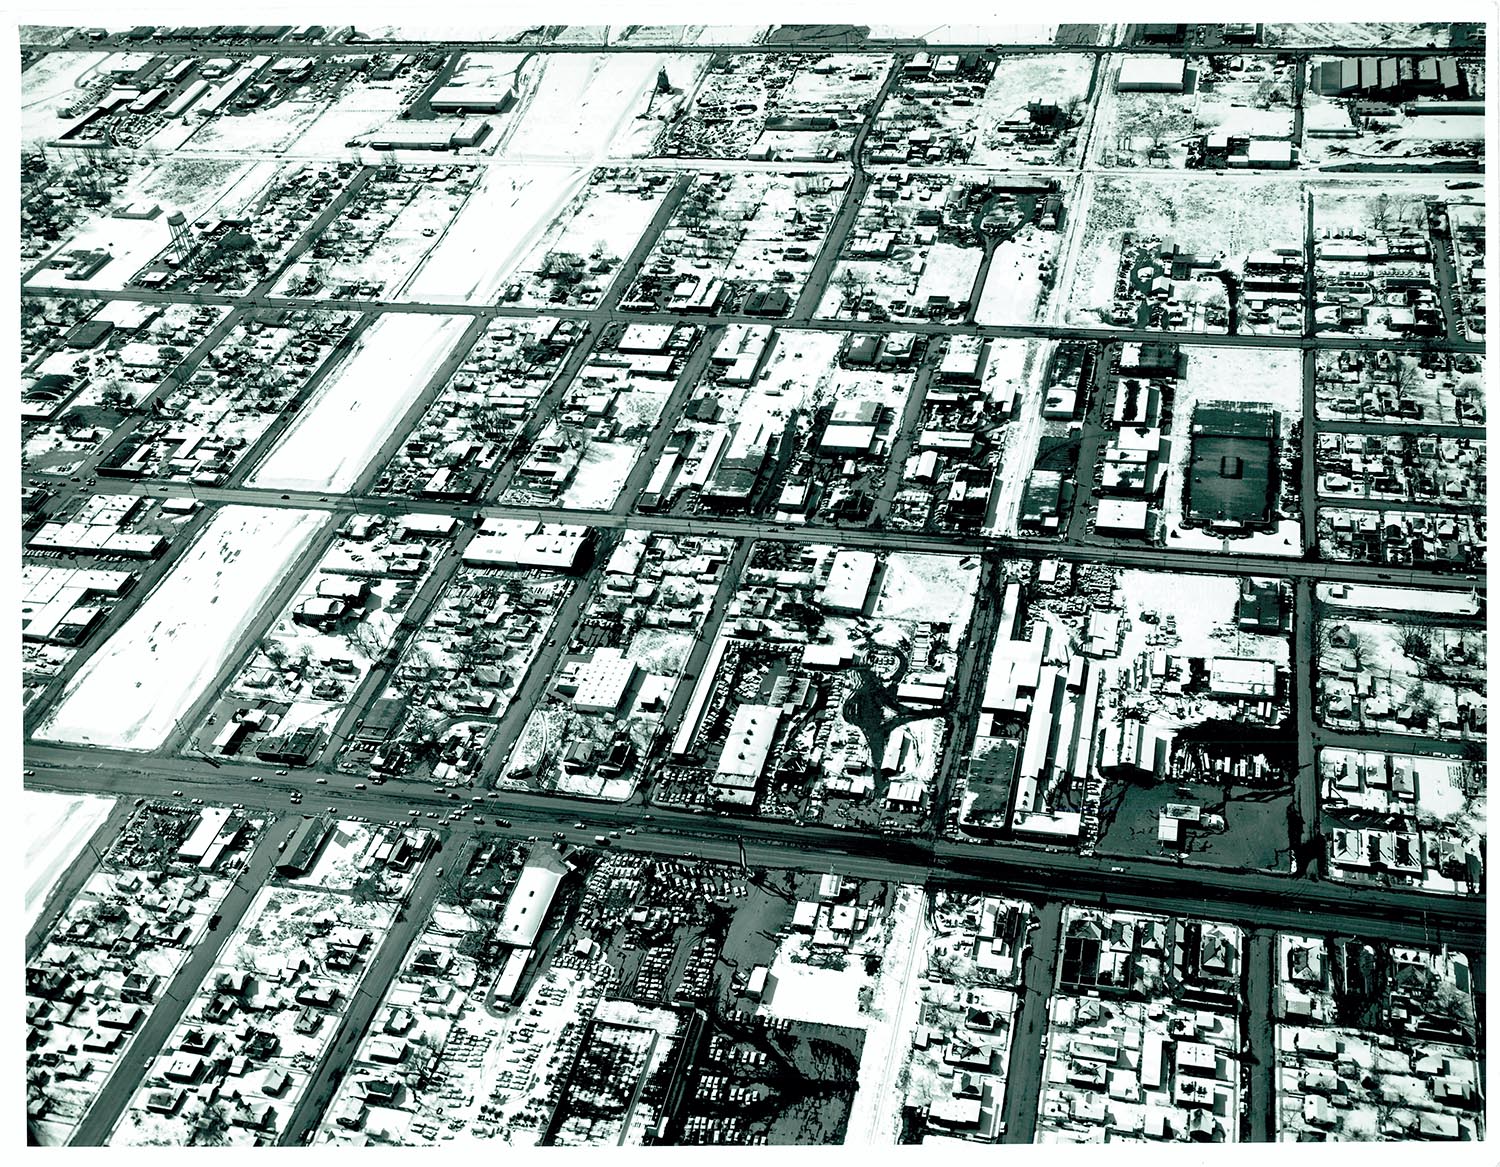 View of the industrial downtown area of South Salt Lake, during construction of I-80 in the 1960s.